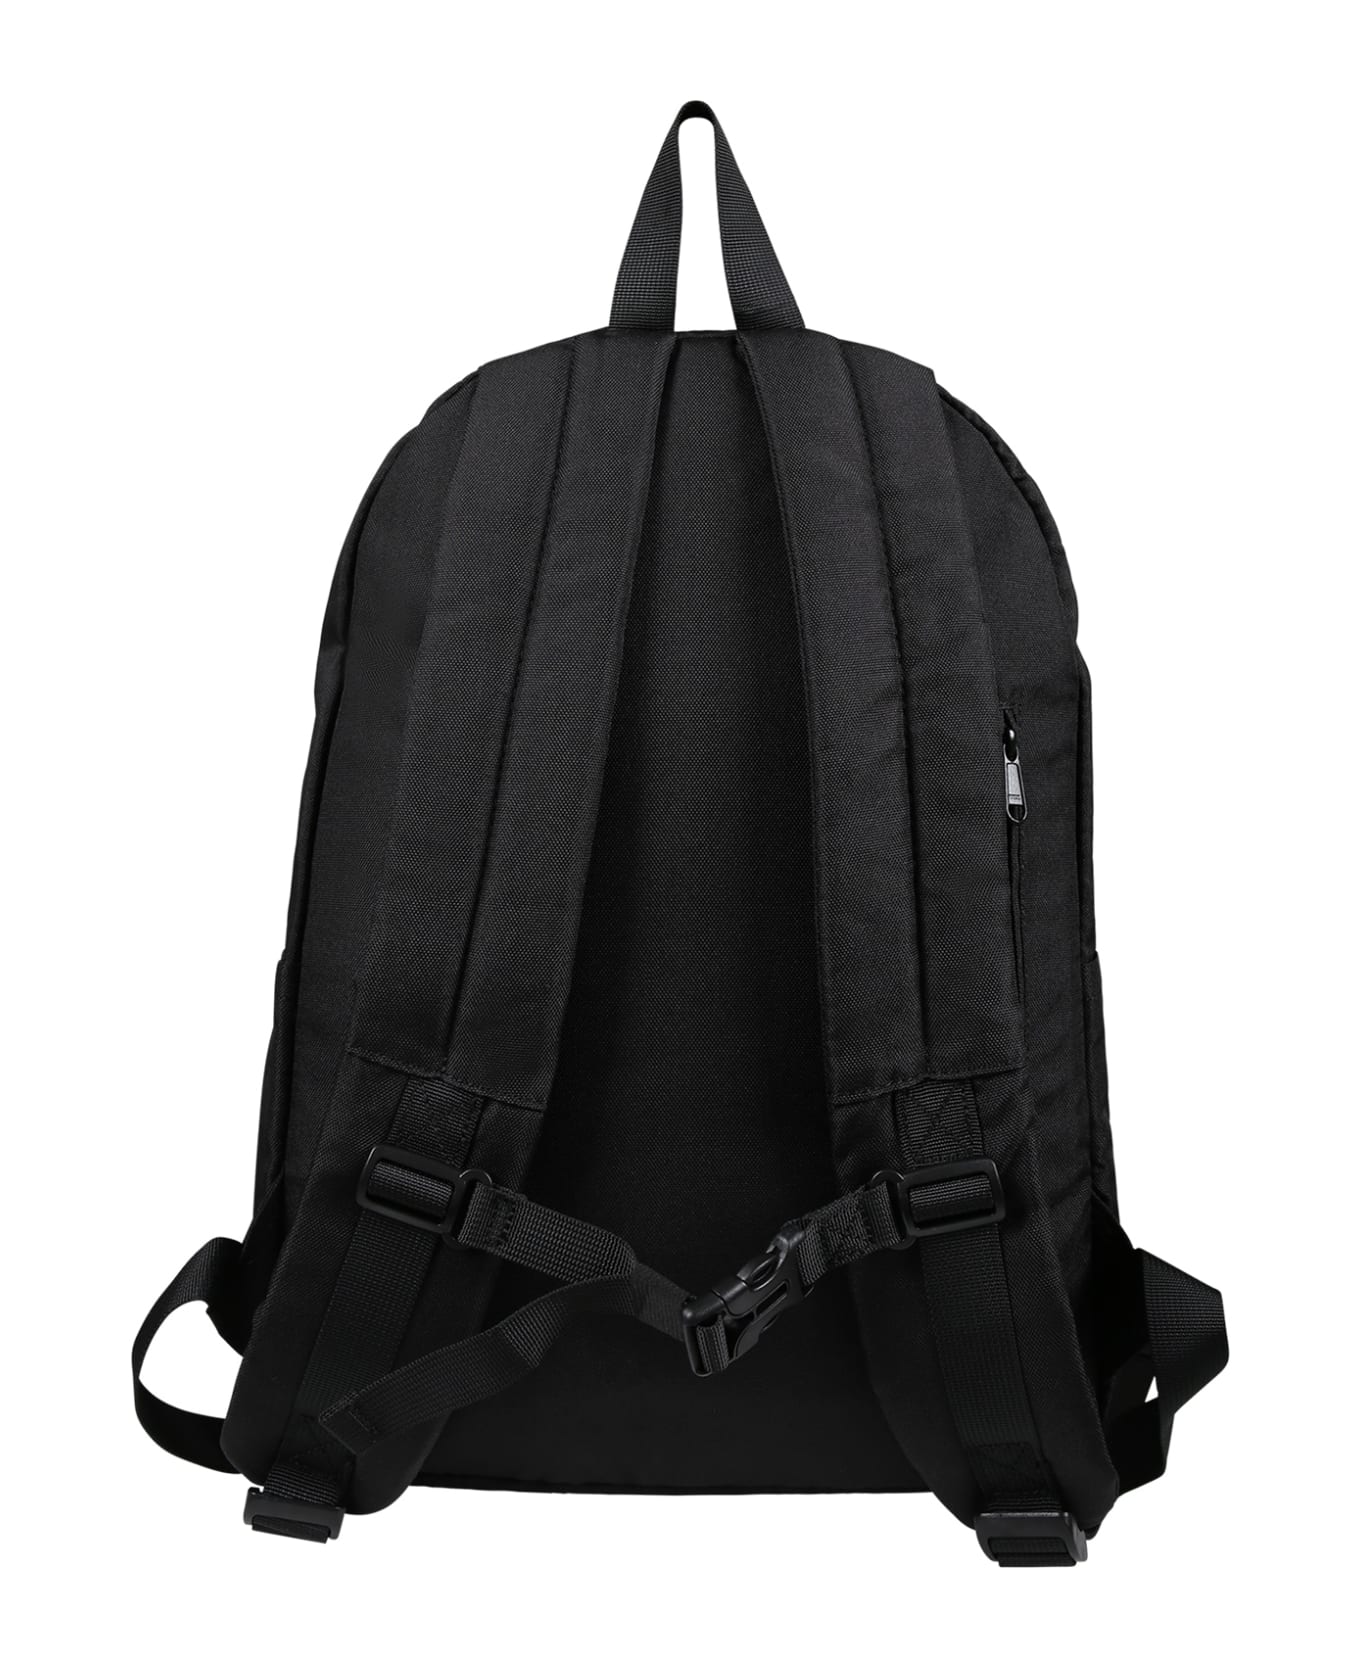 Molo White Backpack For Boy With Flames - Black